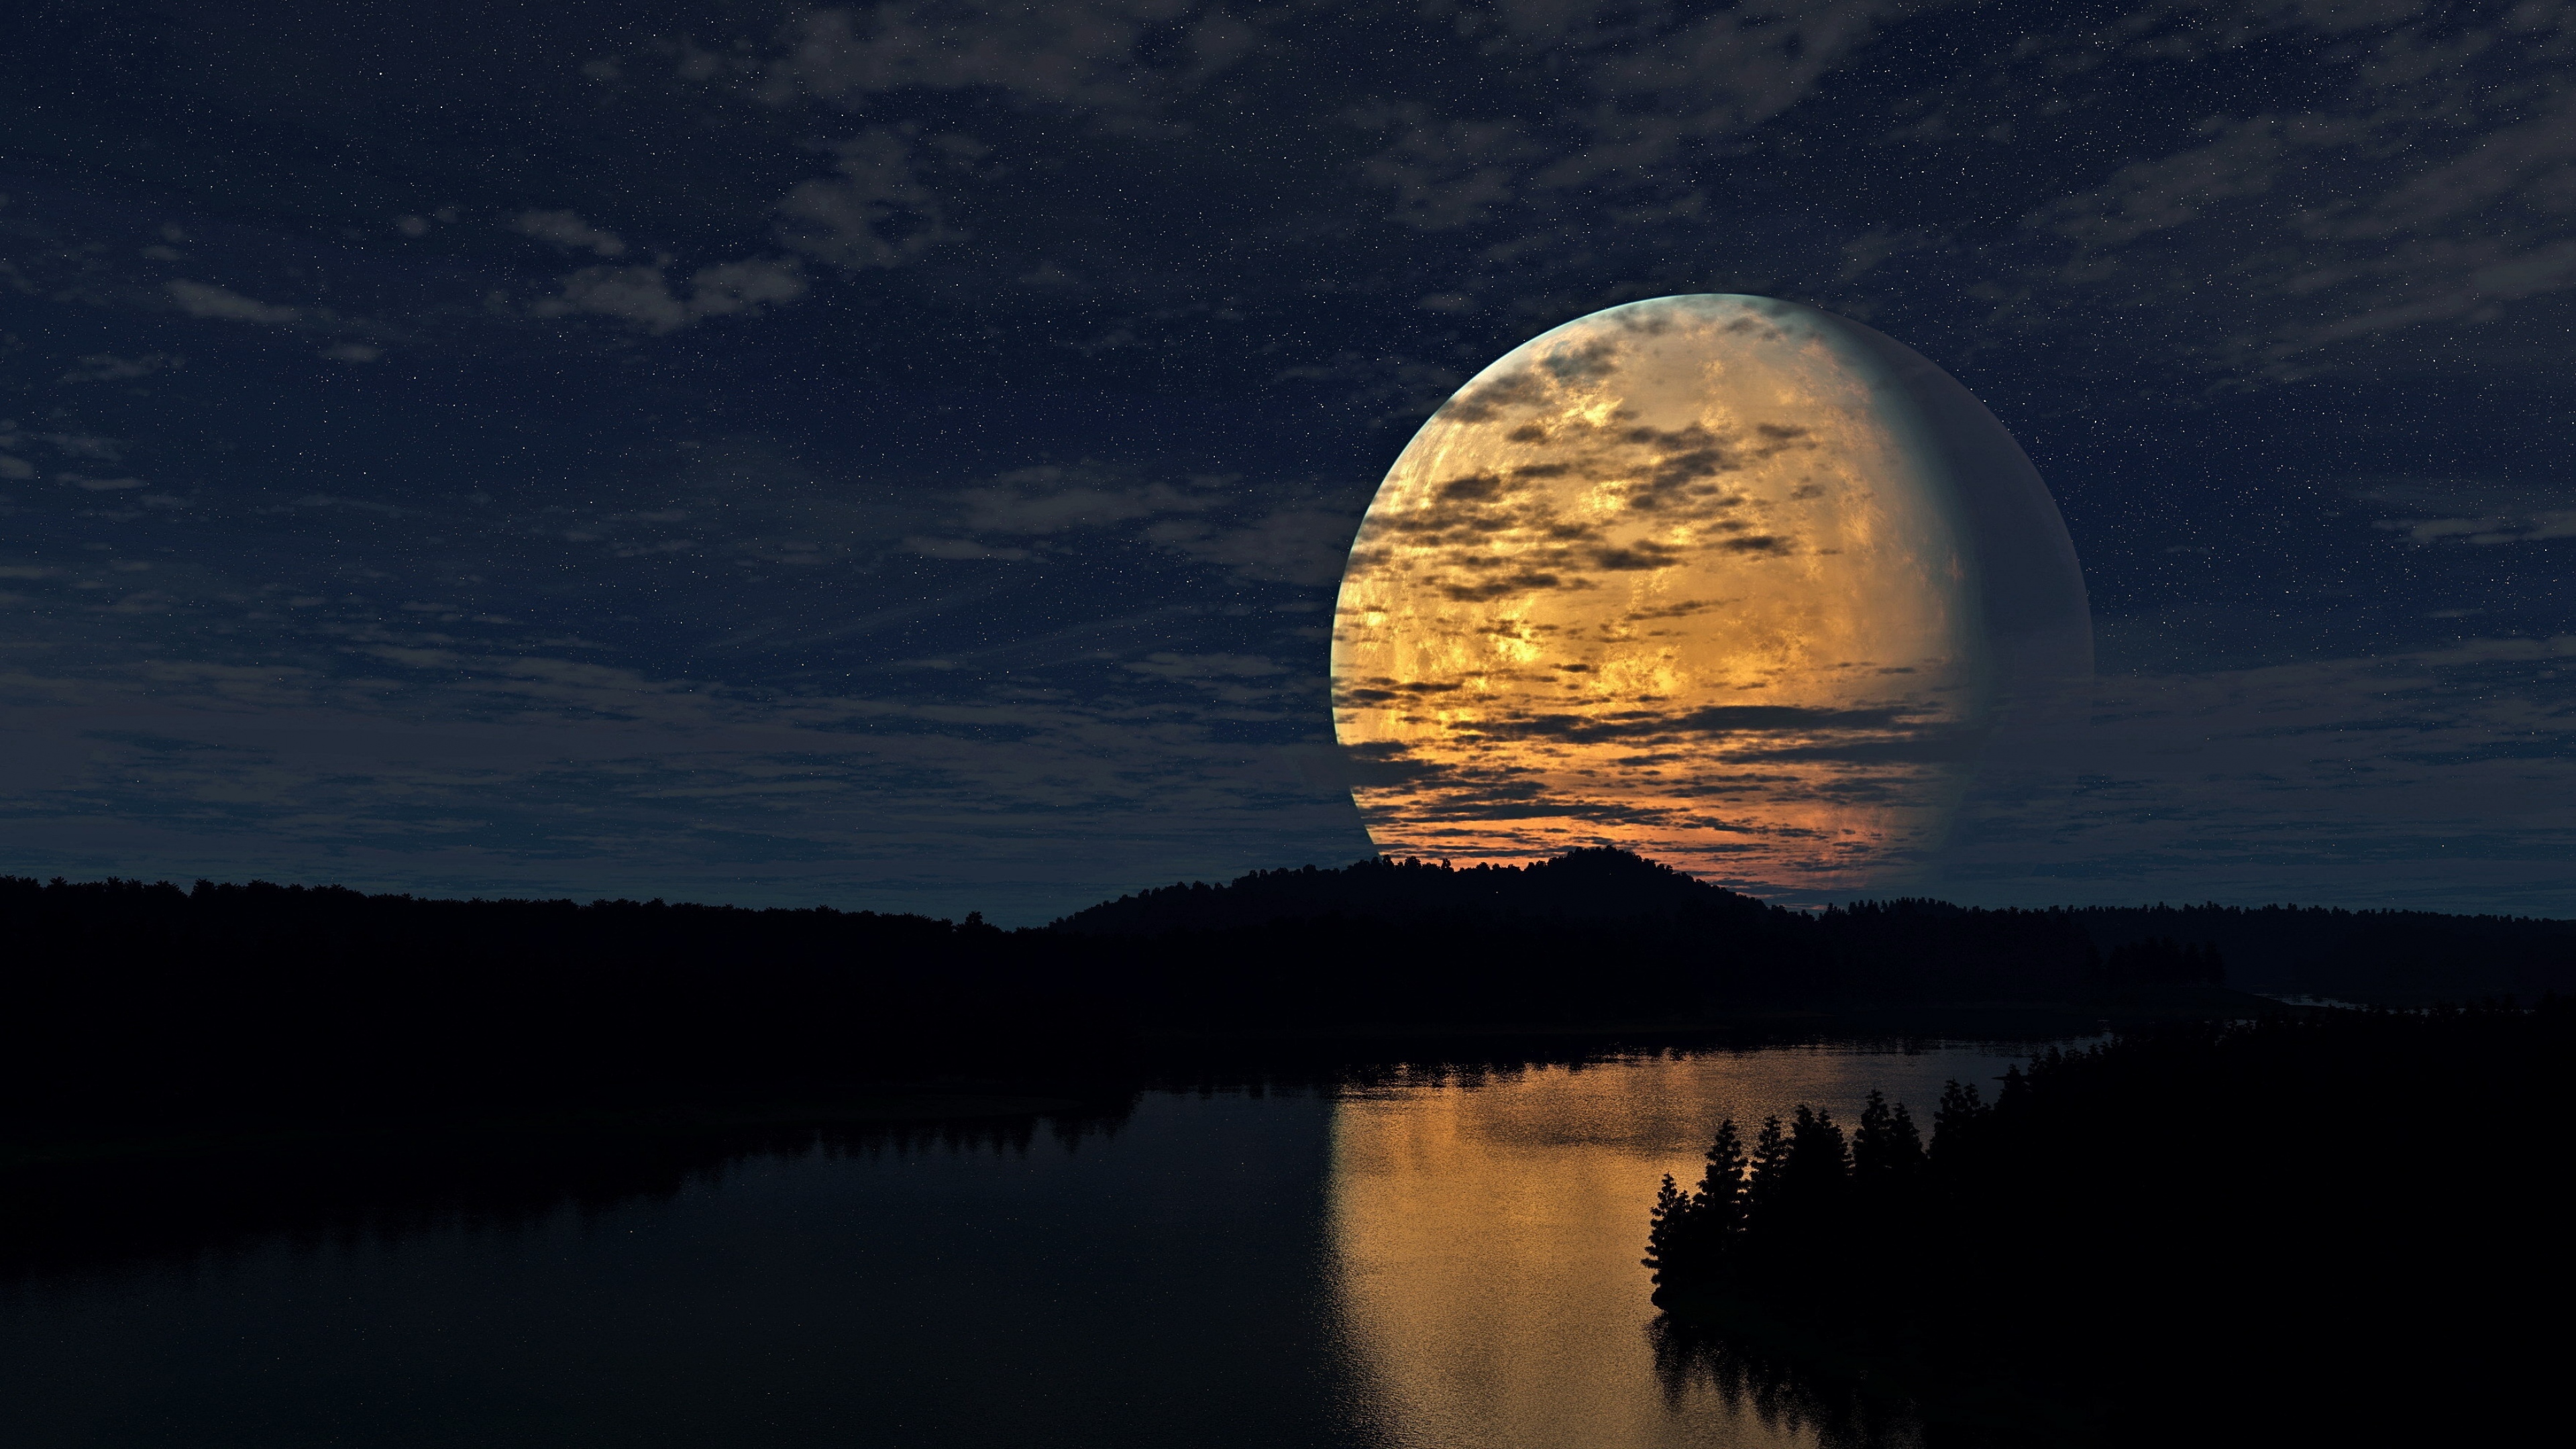 3840x2160 Night Sky Moon River Reflection 4k Hd 4k Wallpapers Images